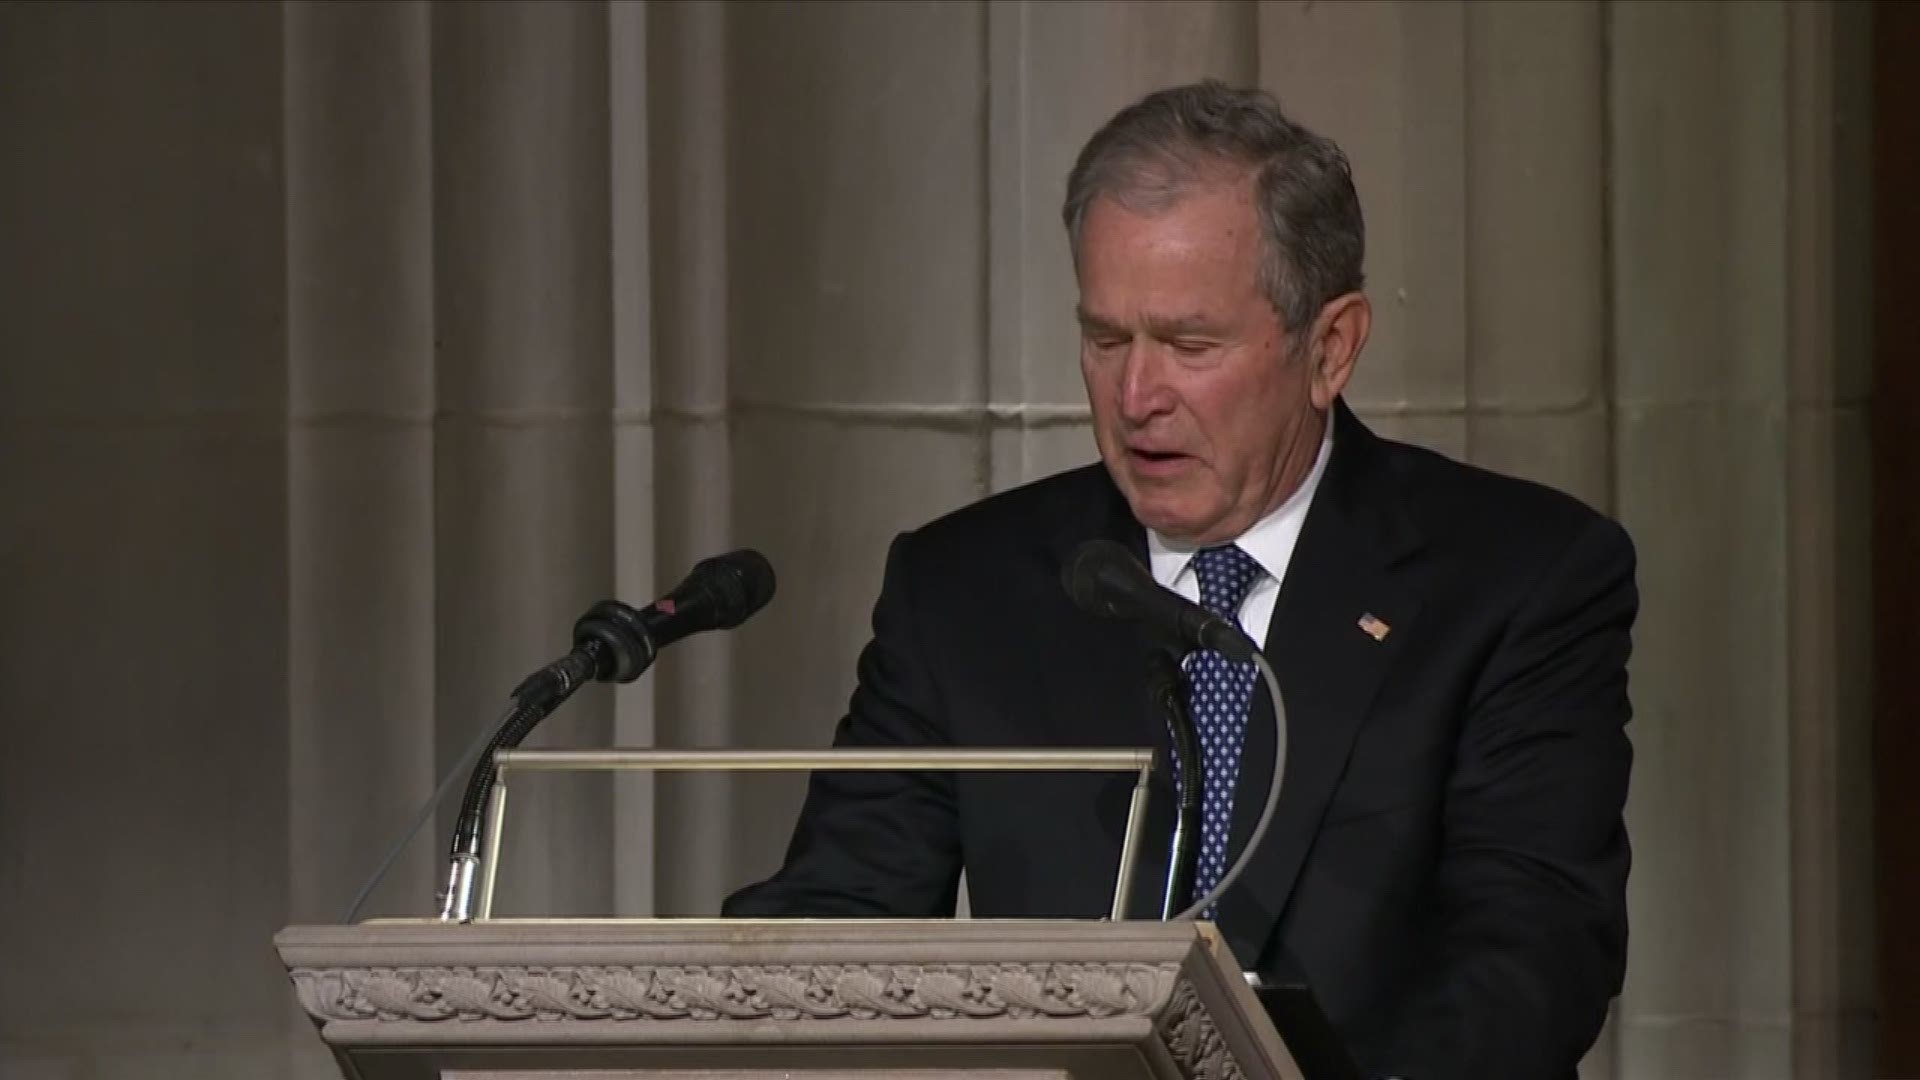 Former President George W. Bush choked back tears as he paid tribute to his dad, 'the best father a son or daughter could have.'